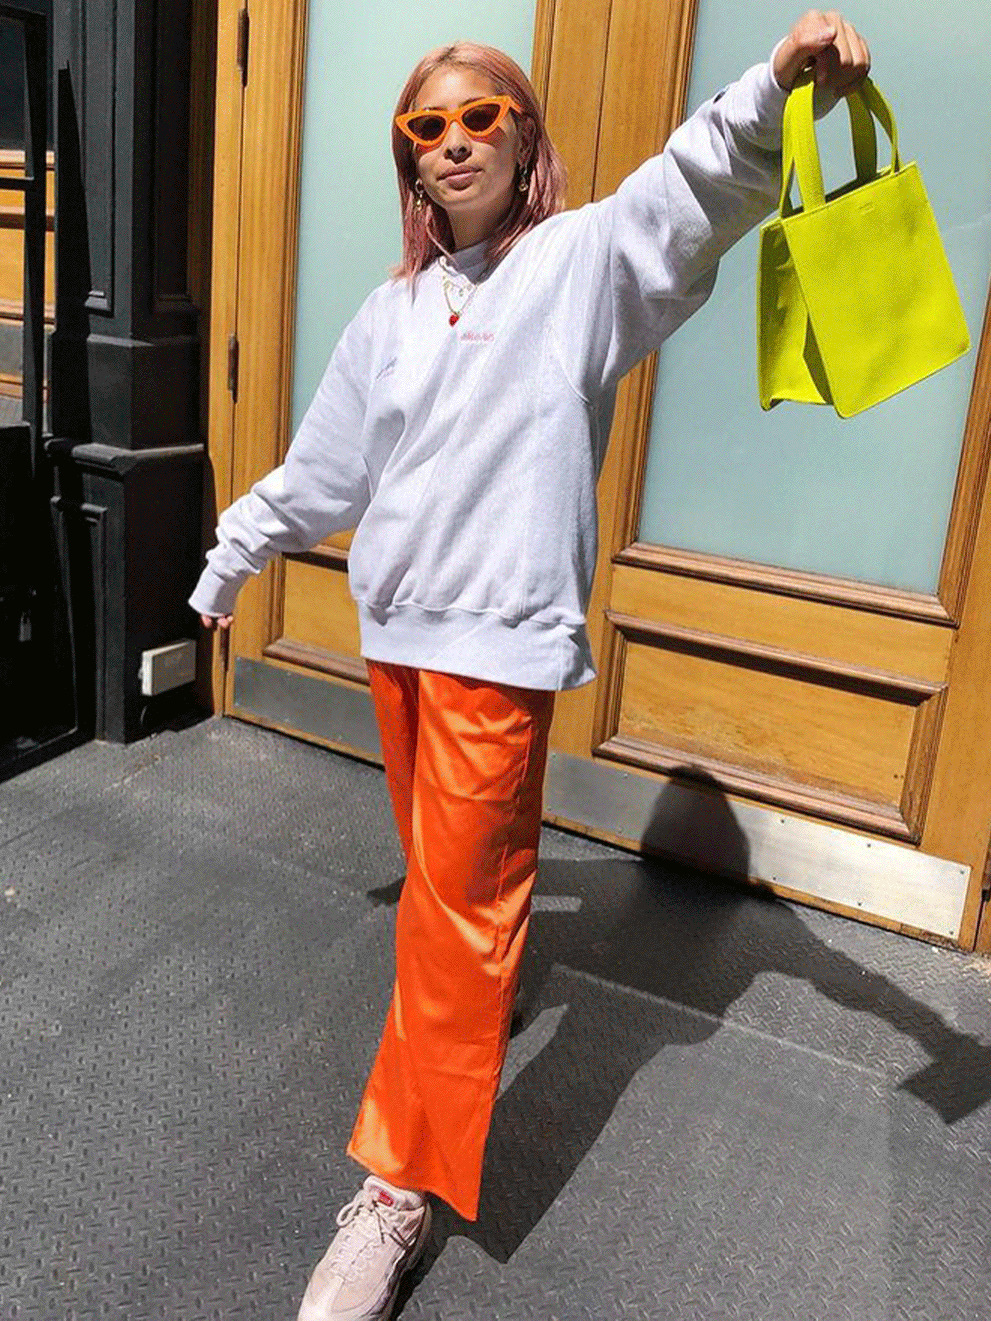 How To Master Wearing The Tangerine Trend 2022